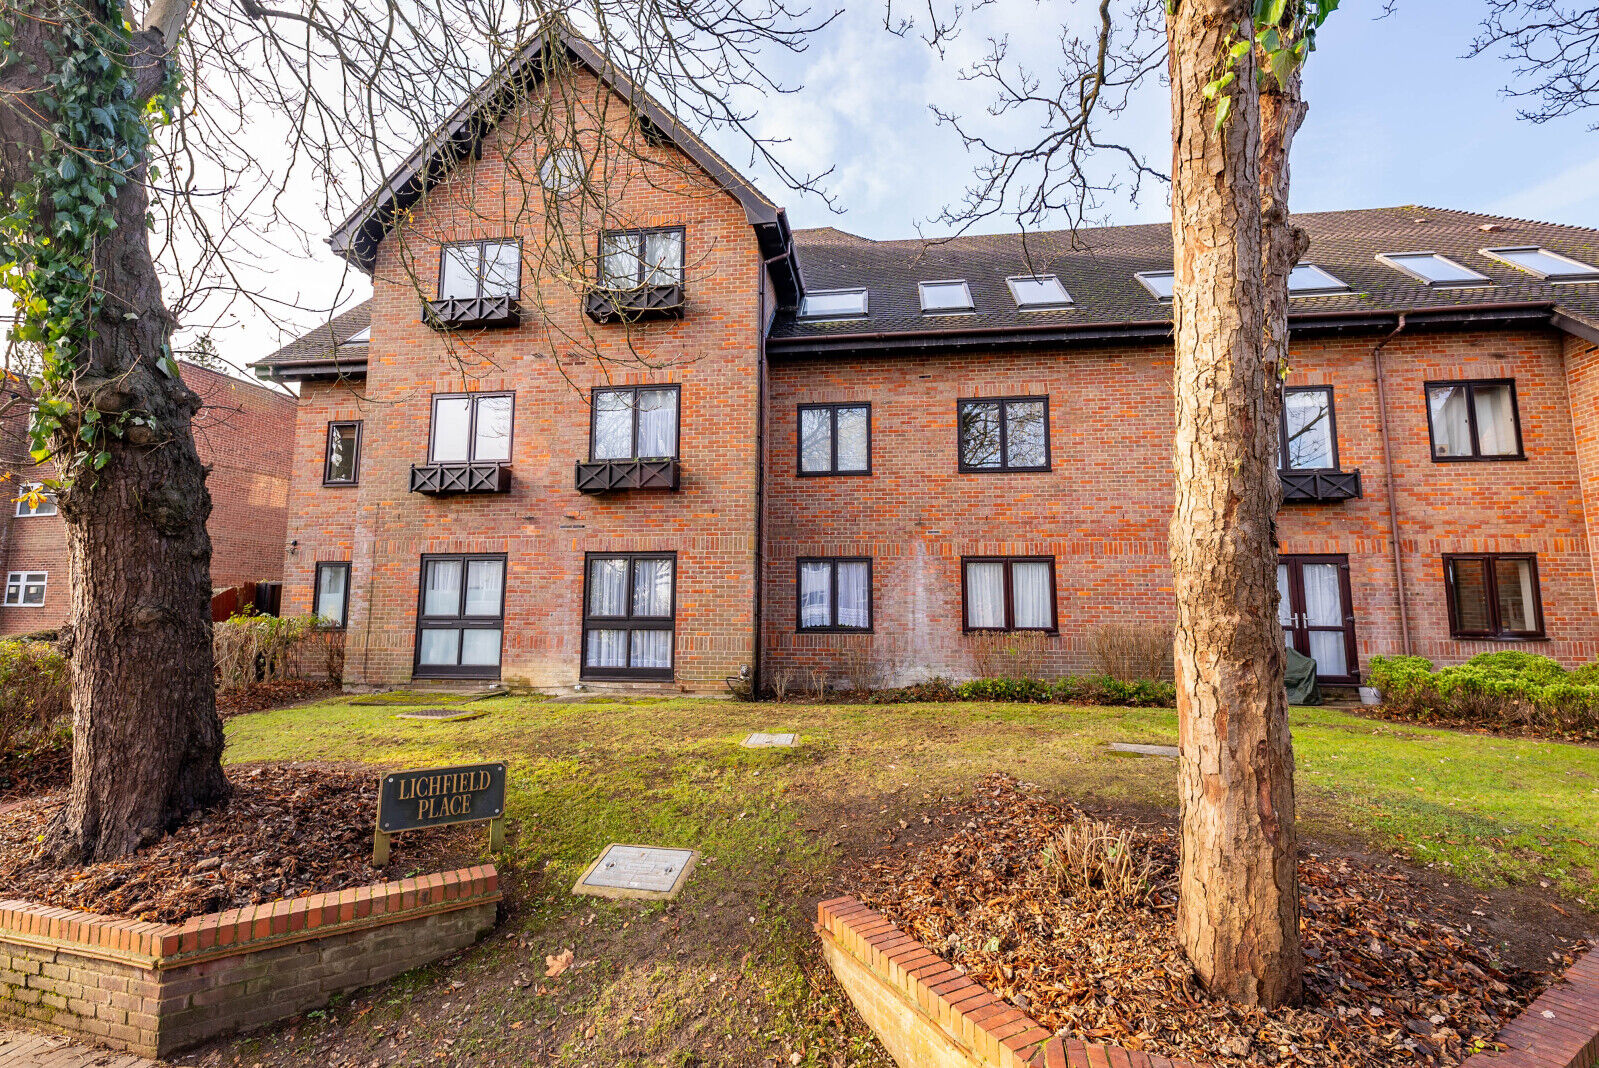 2 bedroom  flat for sale Lichfield Place, Lemsford Road, AL1, main image